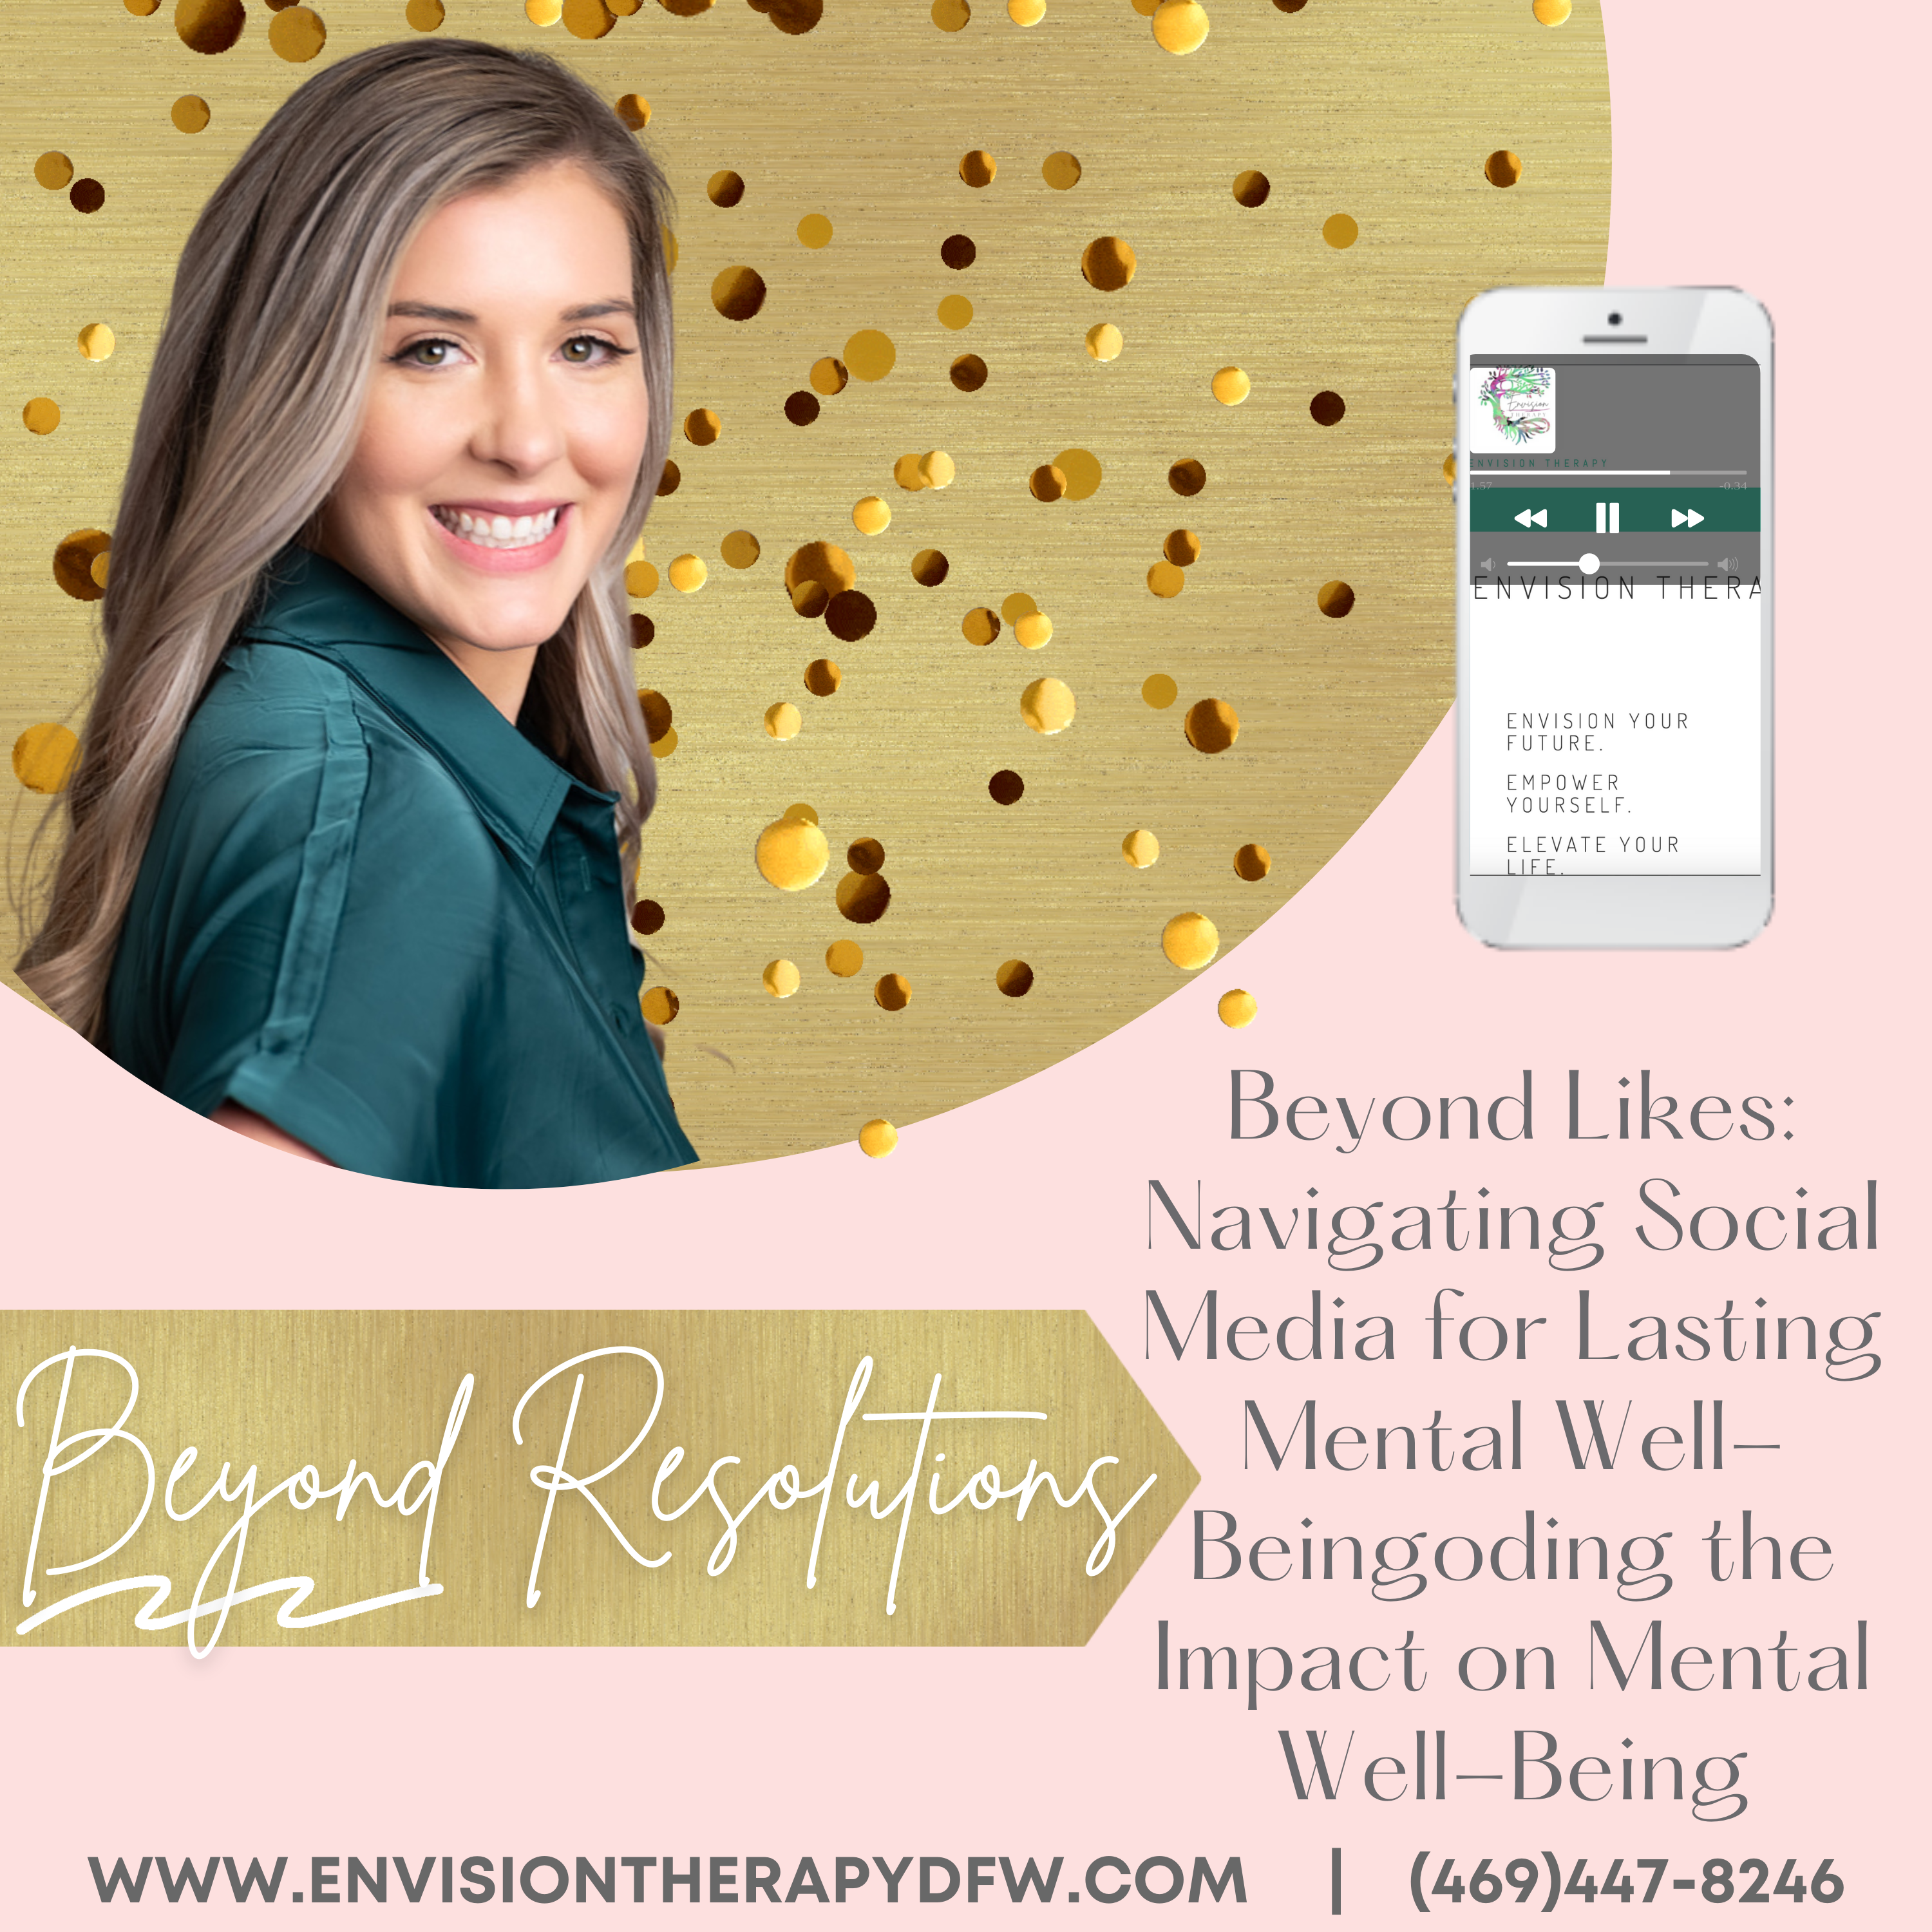 social media, mental health, digital well-being, social comparison, cyberbullying, mindfulness, FOMO, digital detox, self-compassion, authentic connections